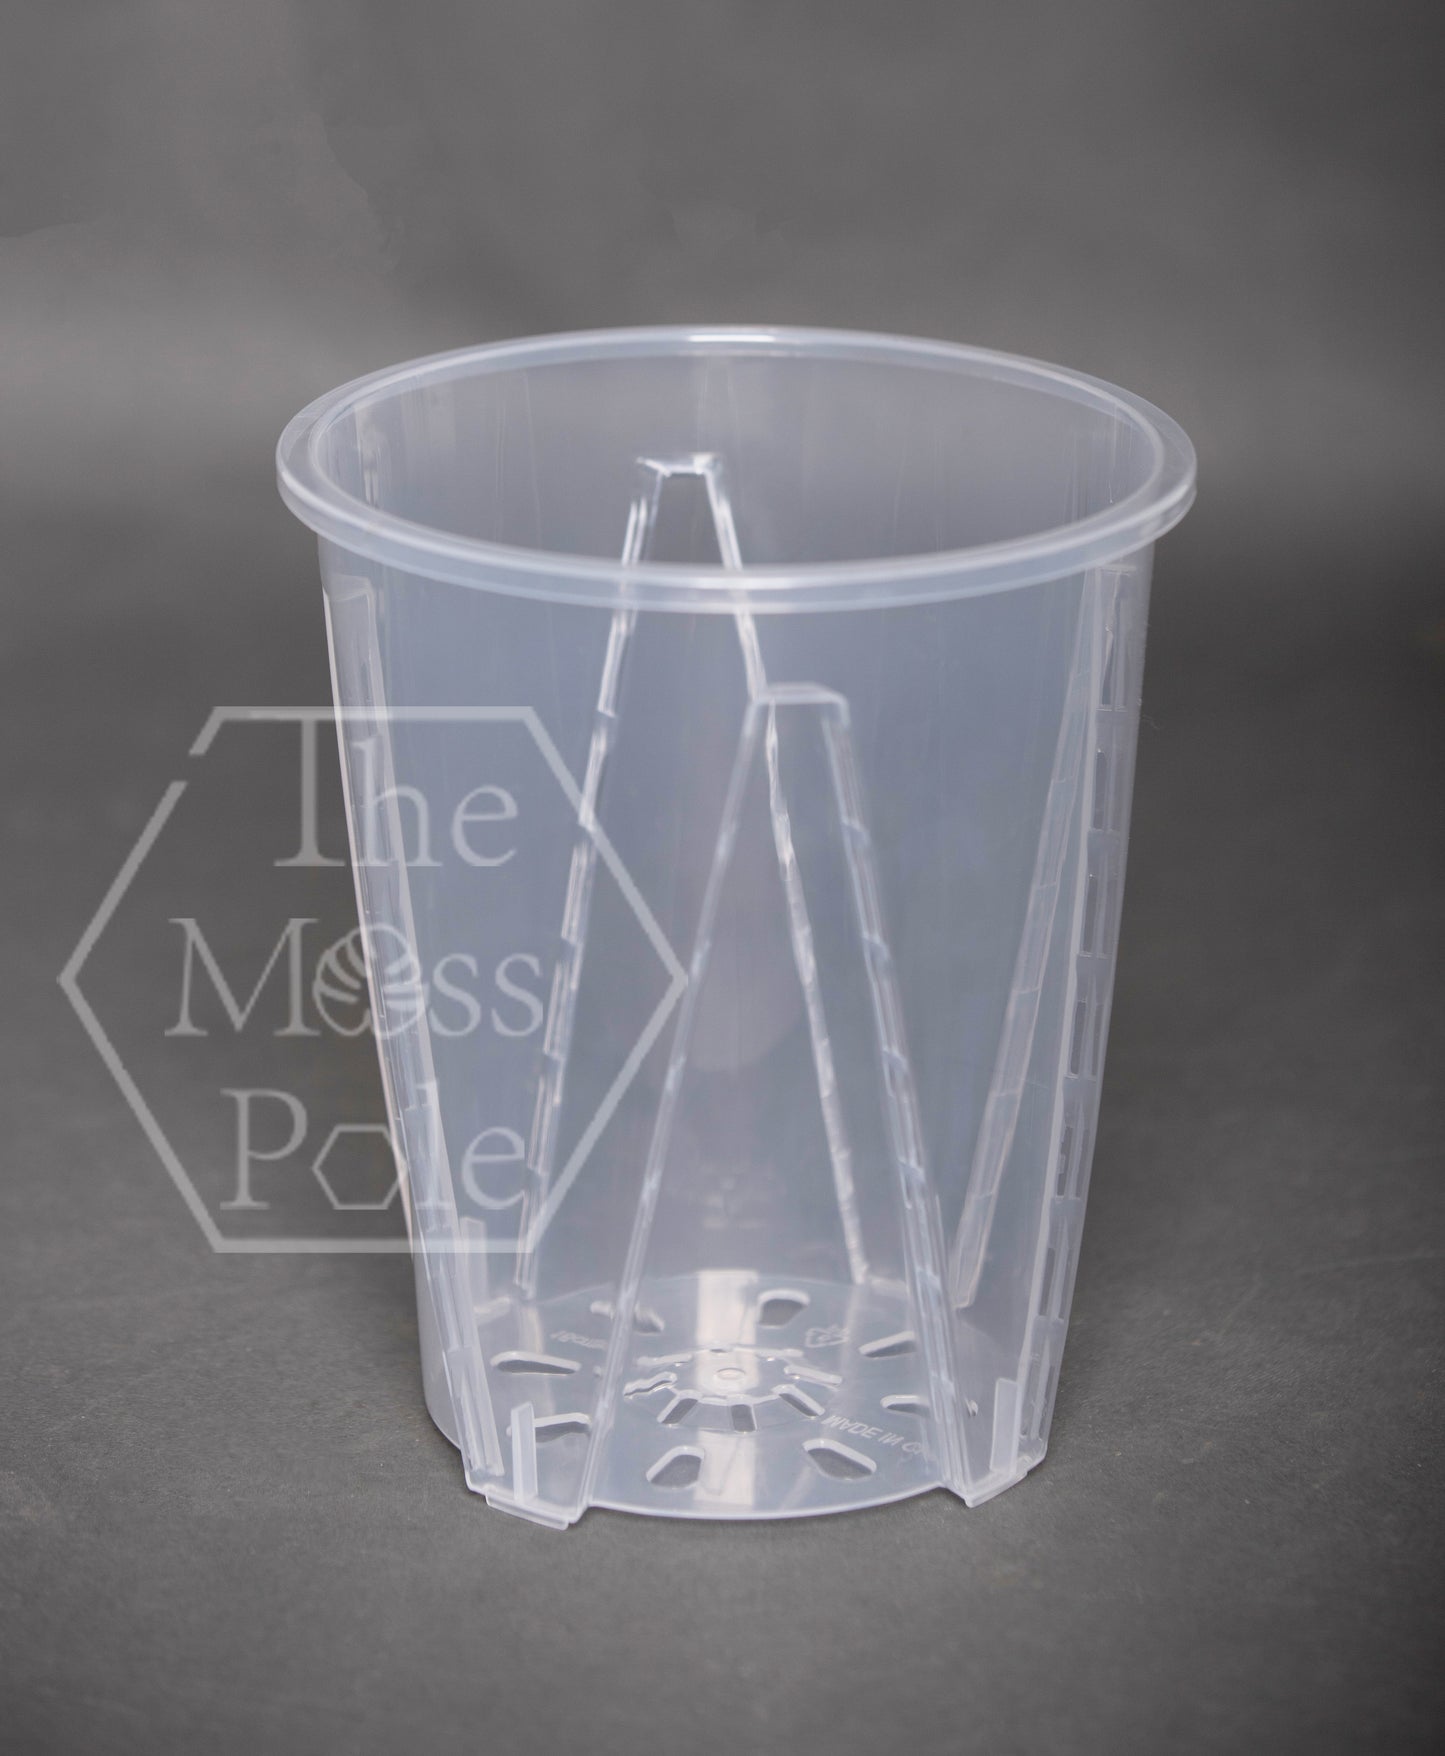 High quality TALL Clear pot with good drainage! Multi-size Available!